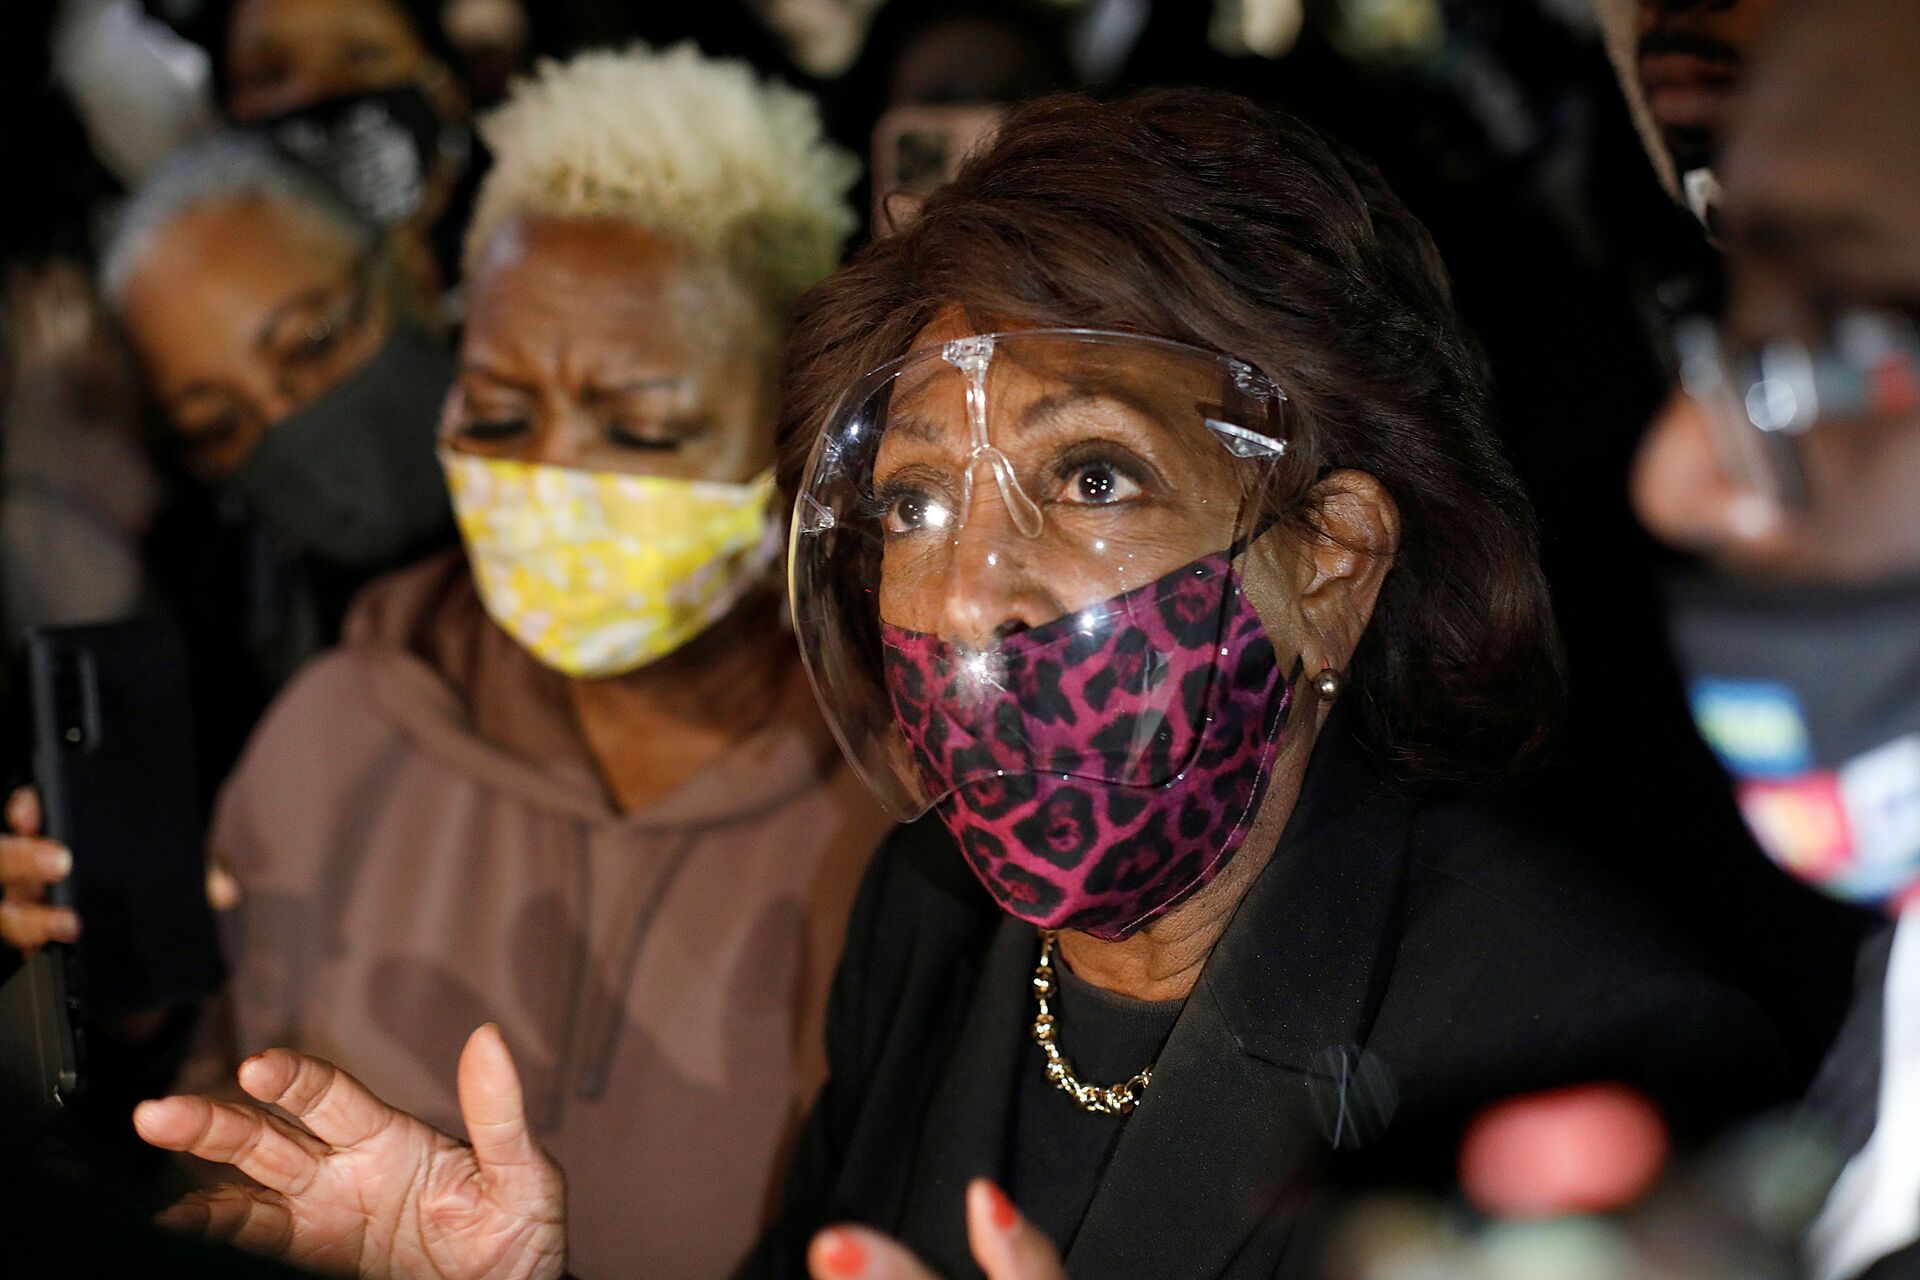 ‘Absolutely Not’: Maxine Waters Owes No Apology for ‘Confrontational’ Comments, Says Speaker Pelosi - Sputnik International, 1920, 19.04.2021